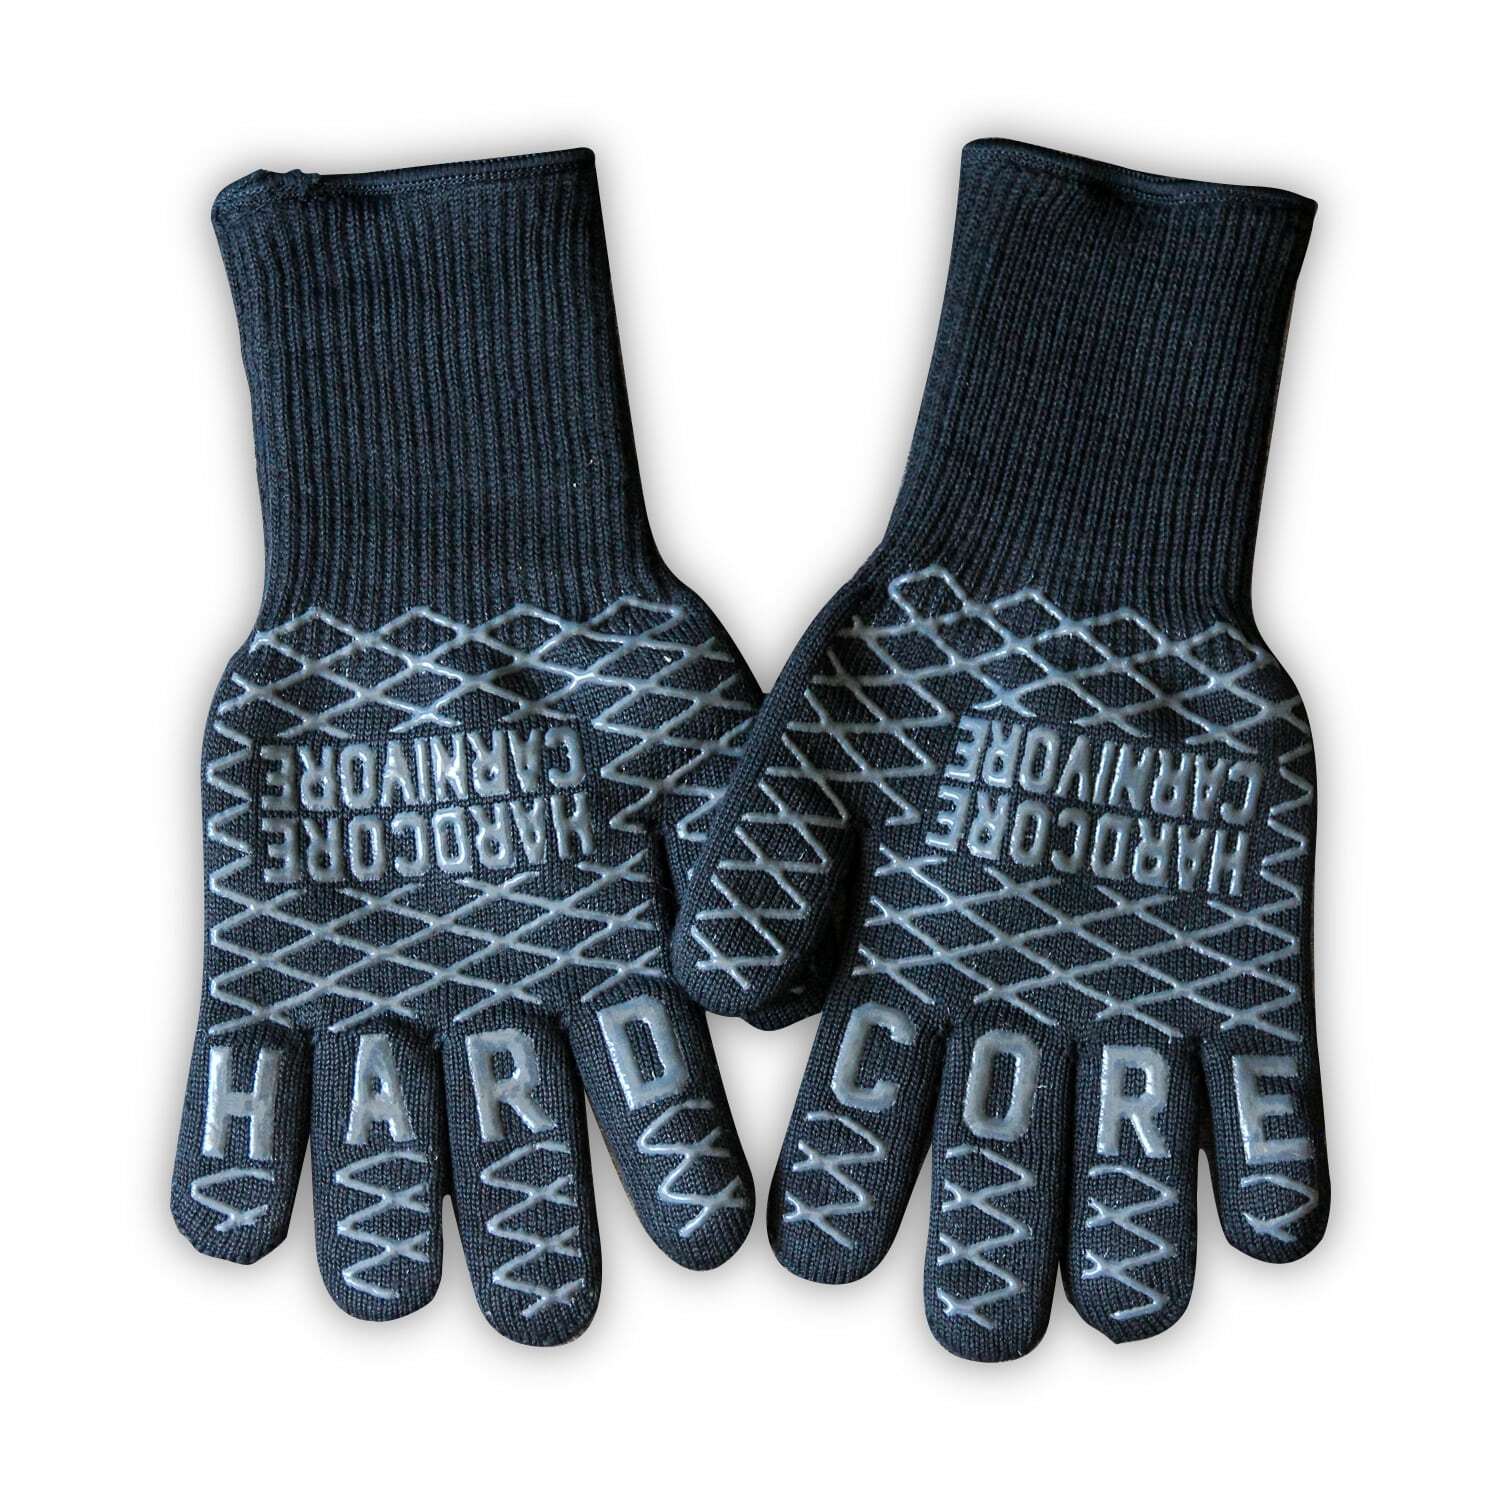 Hardcore Carnivore High Heat BBQ Gloves - Heat protection up to 760oC -11264